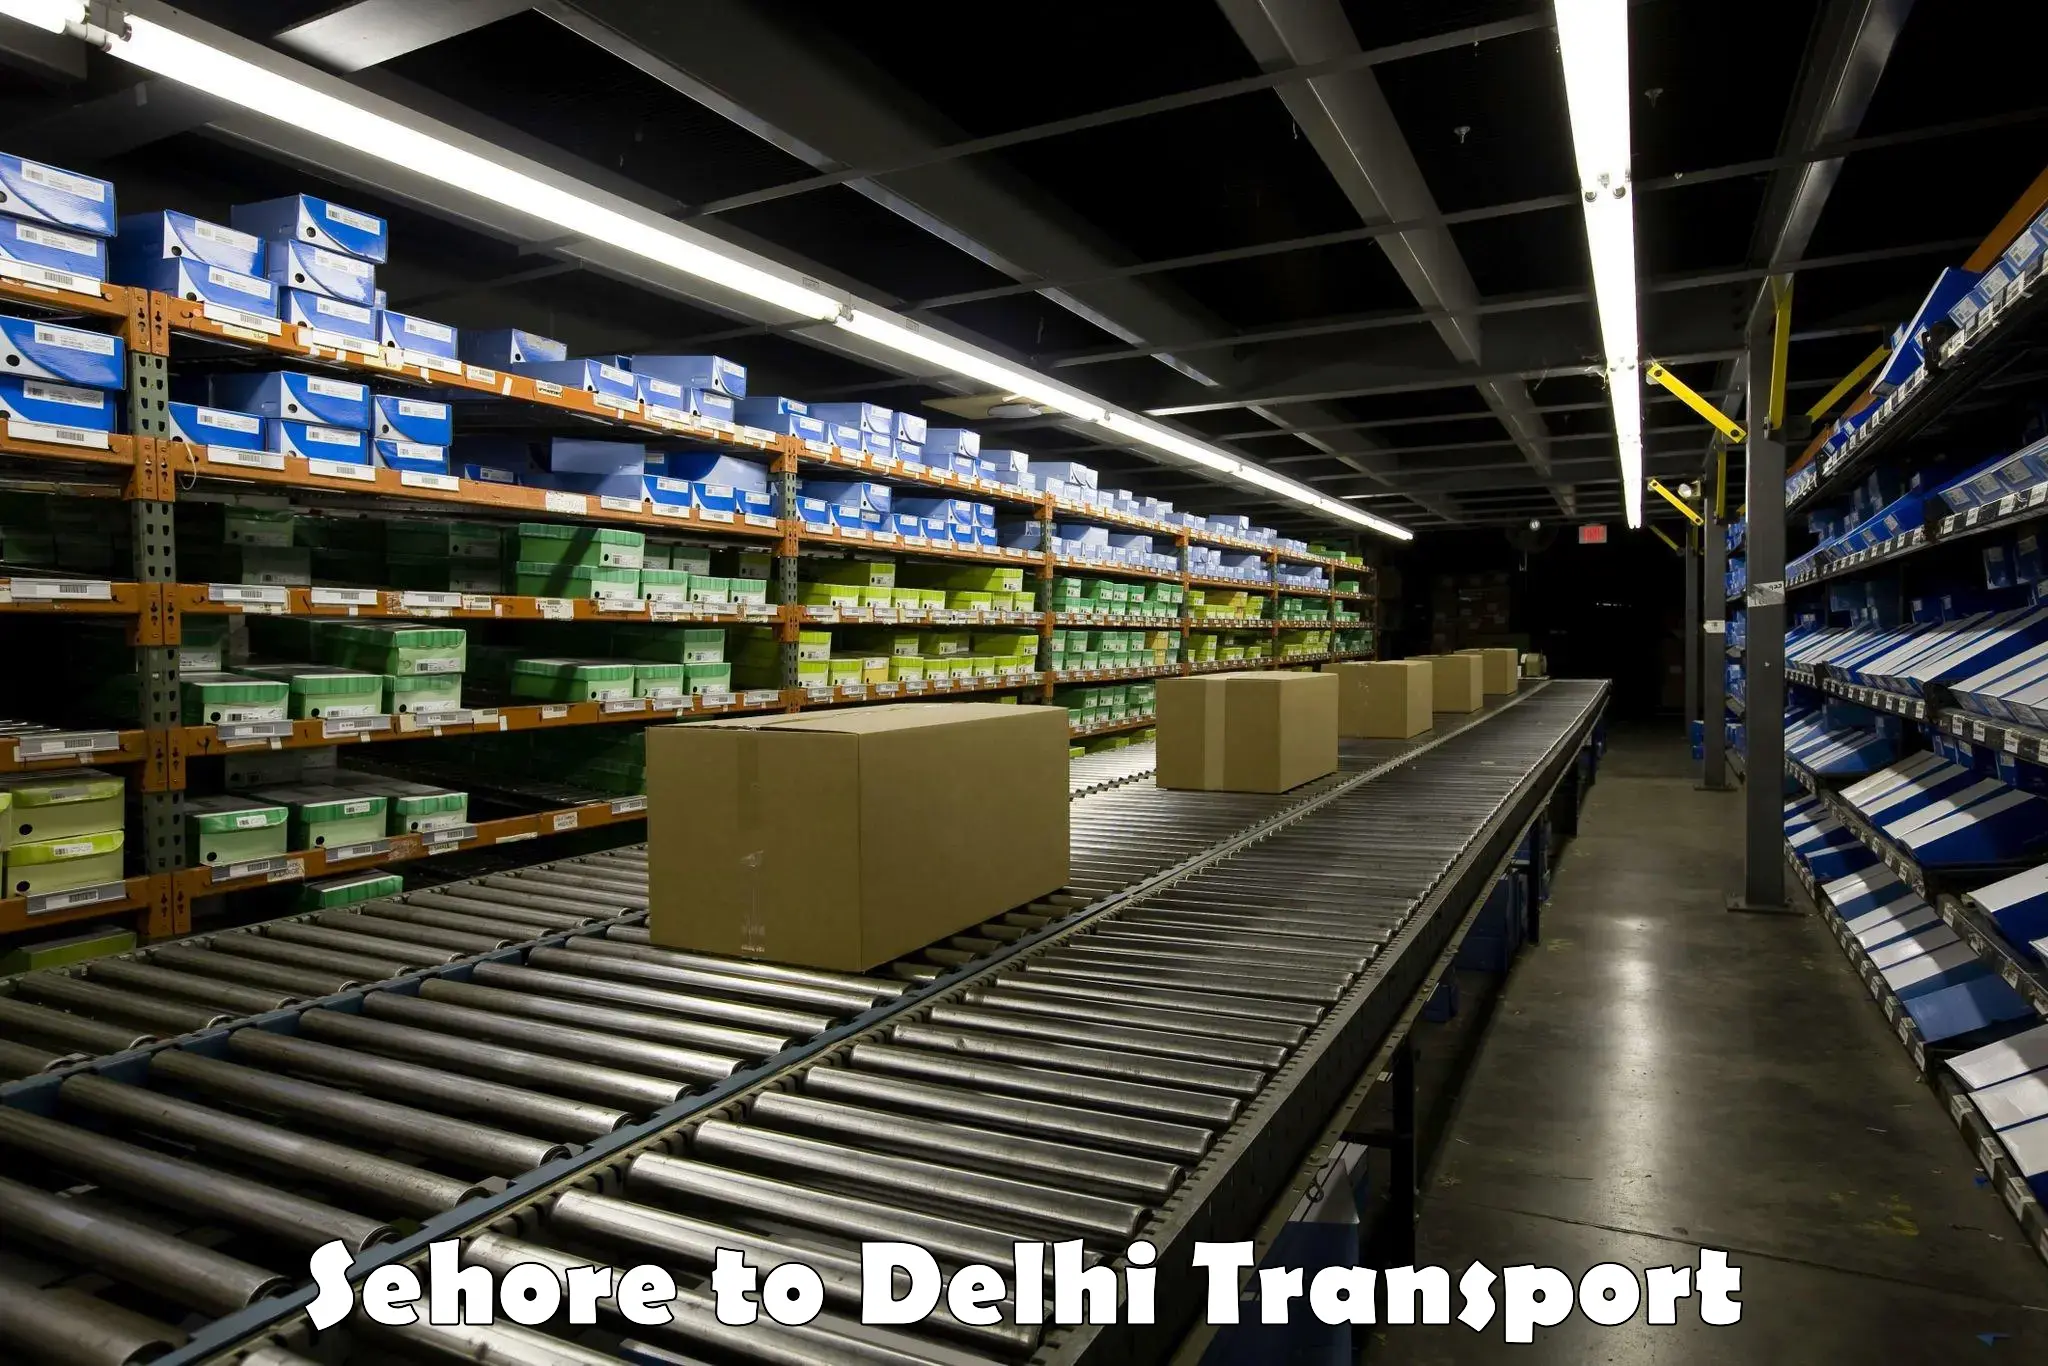 Nationwide transport services Sehore to NCR